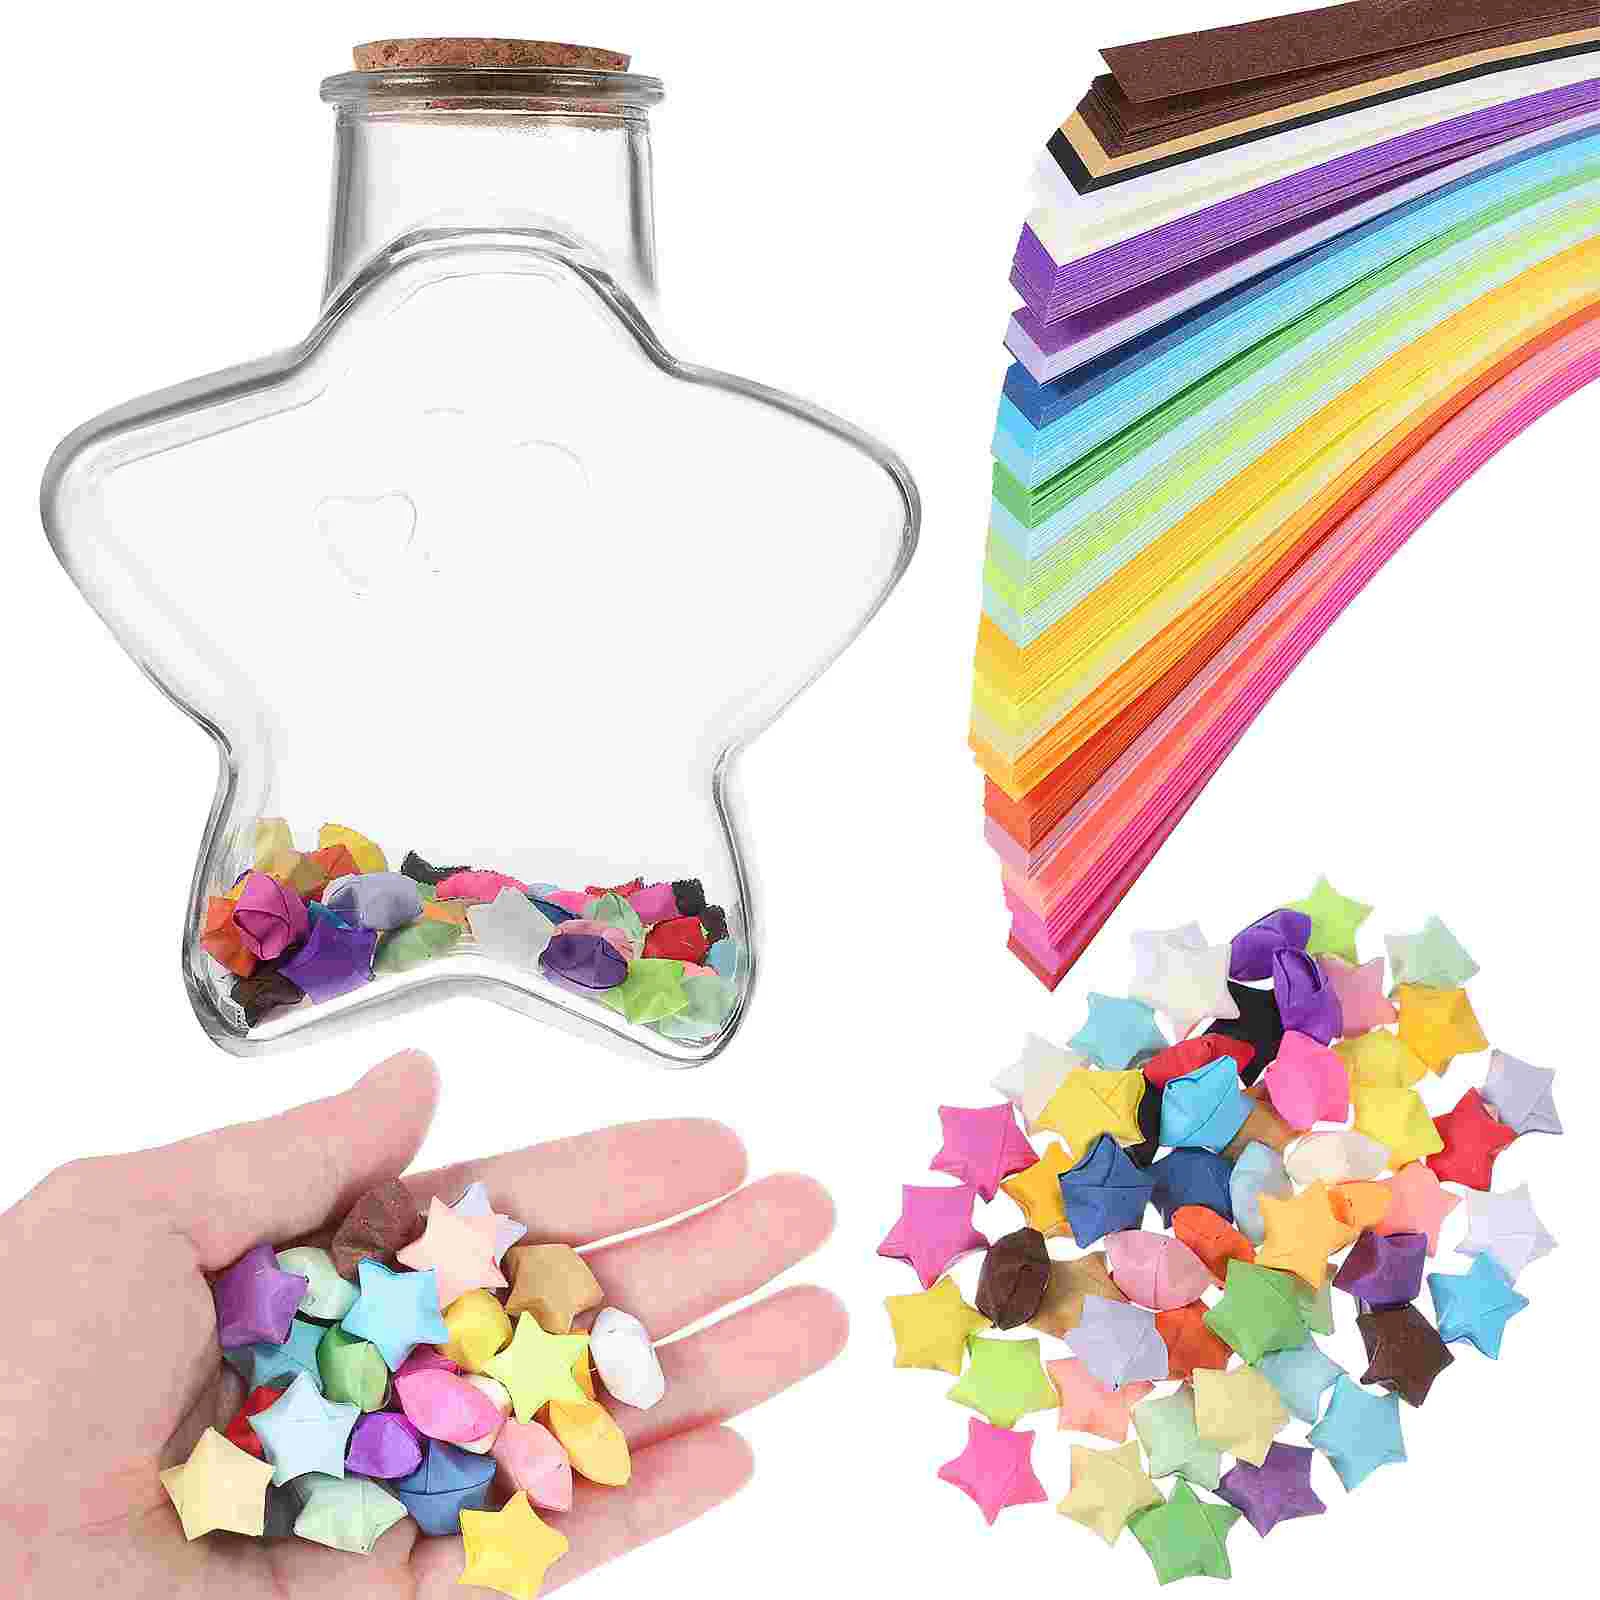 

540 Sheets Room Decore Colorful Origami Star Paper Strips Lucky Outfit Sets Folding Cellophane Mtg Storage